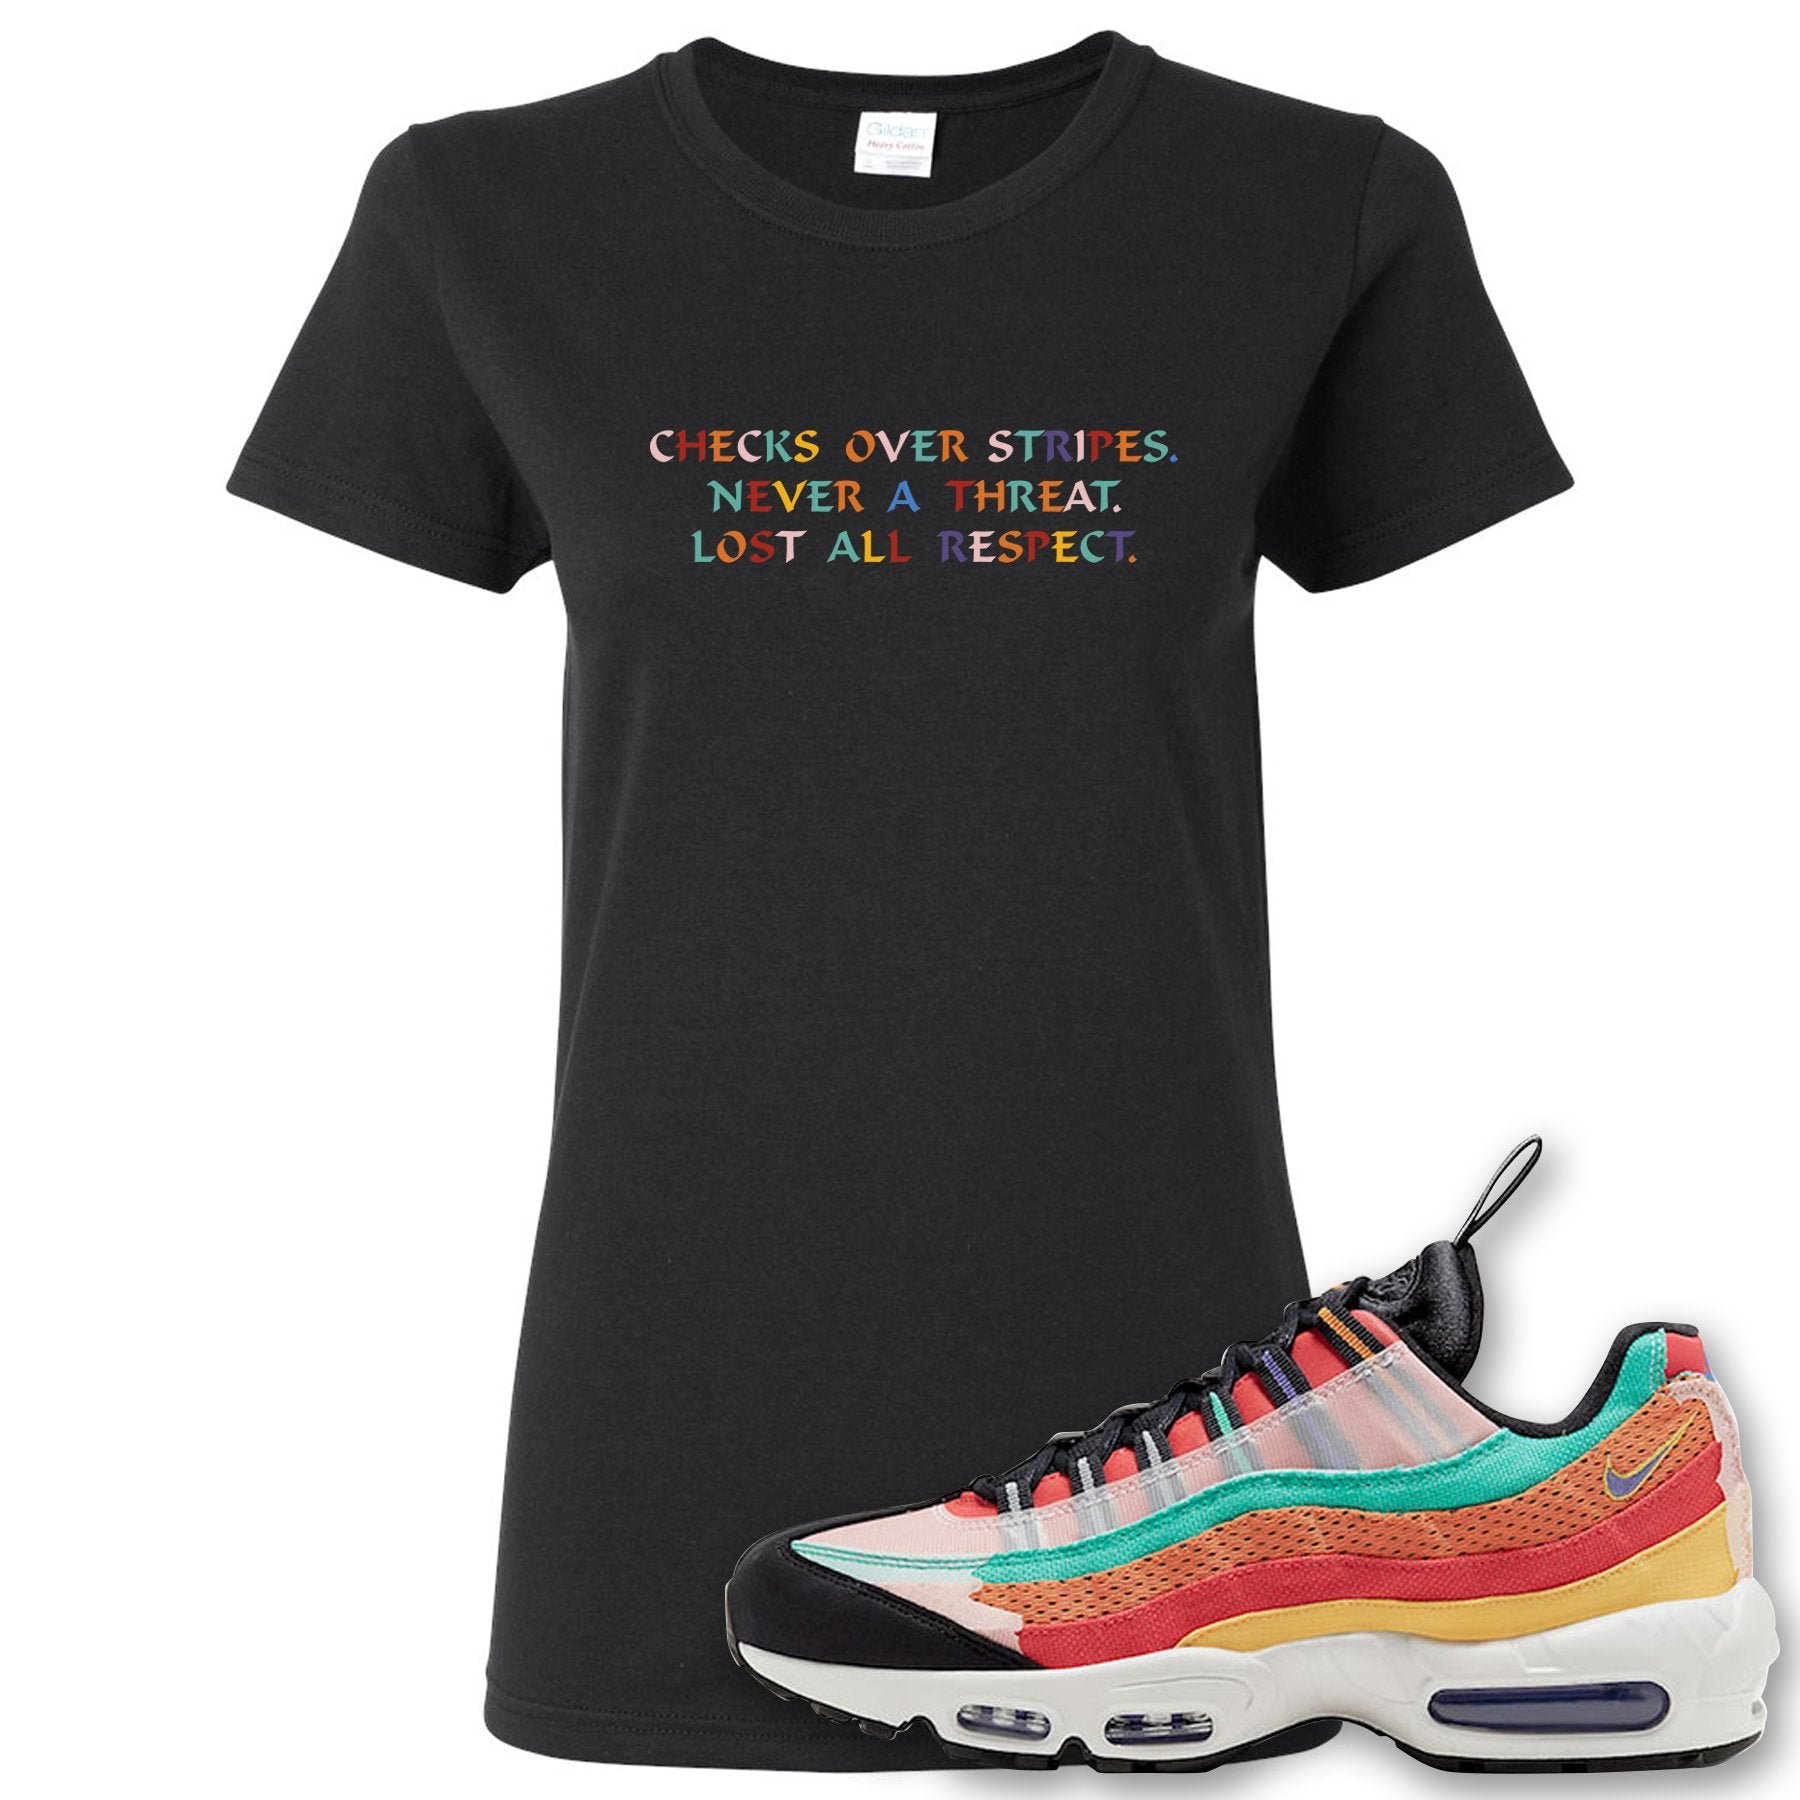 Air Max 95 Black History Month Sneaker Black Women's T Shirt | Women's Tees to match Nike Air Max 95 Black History Month Shoes | Checks Over Stripes